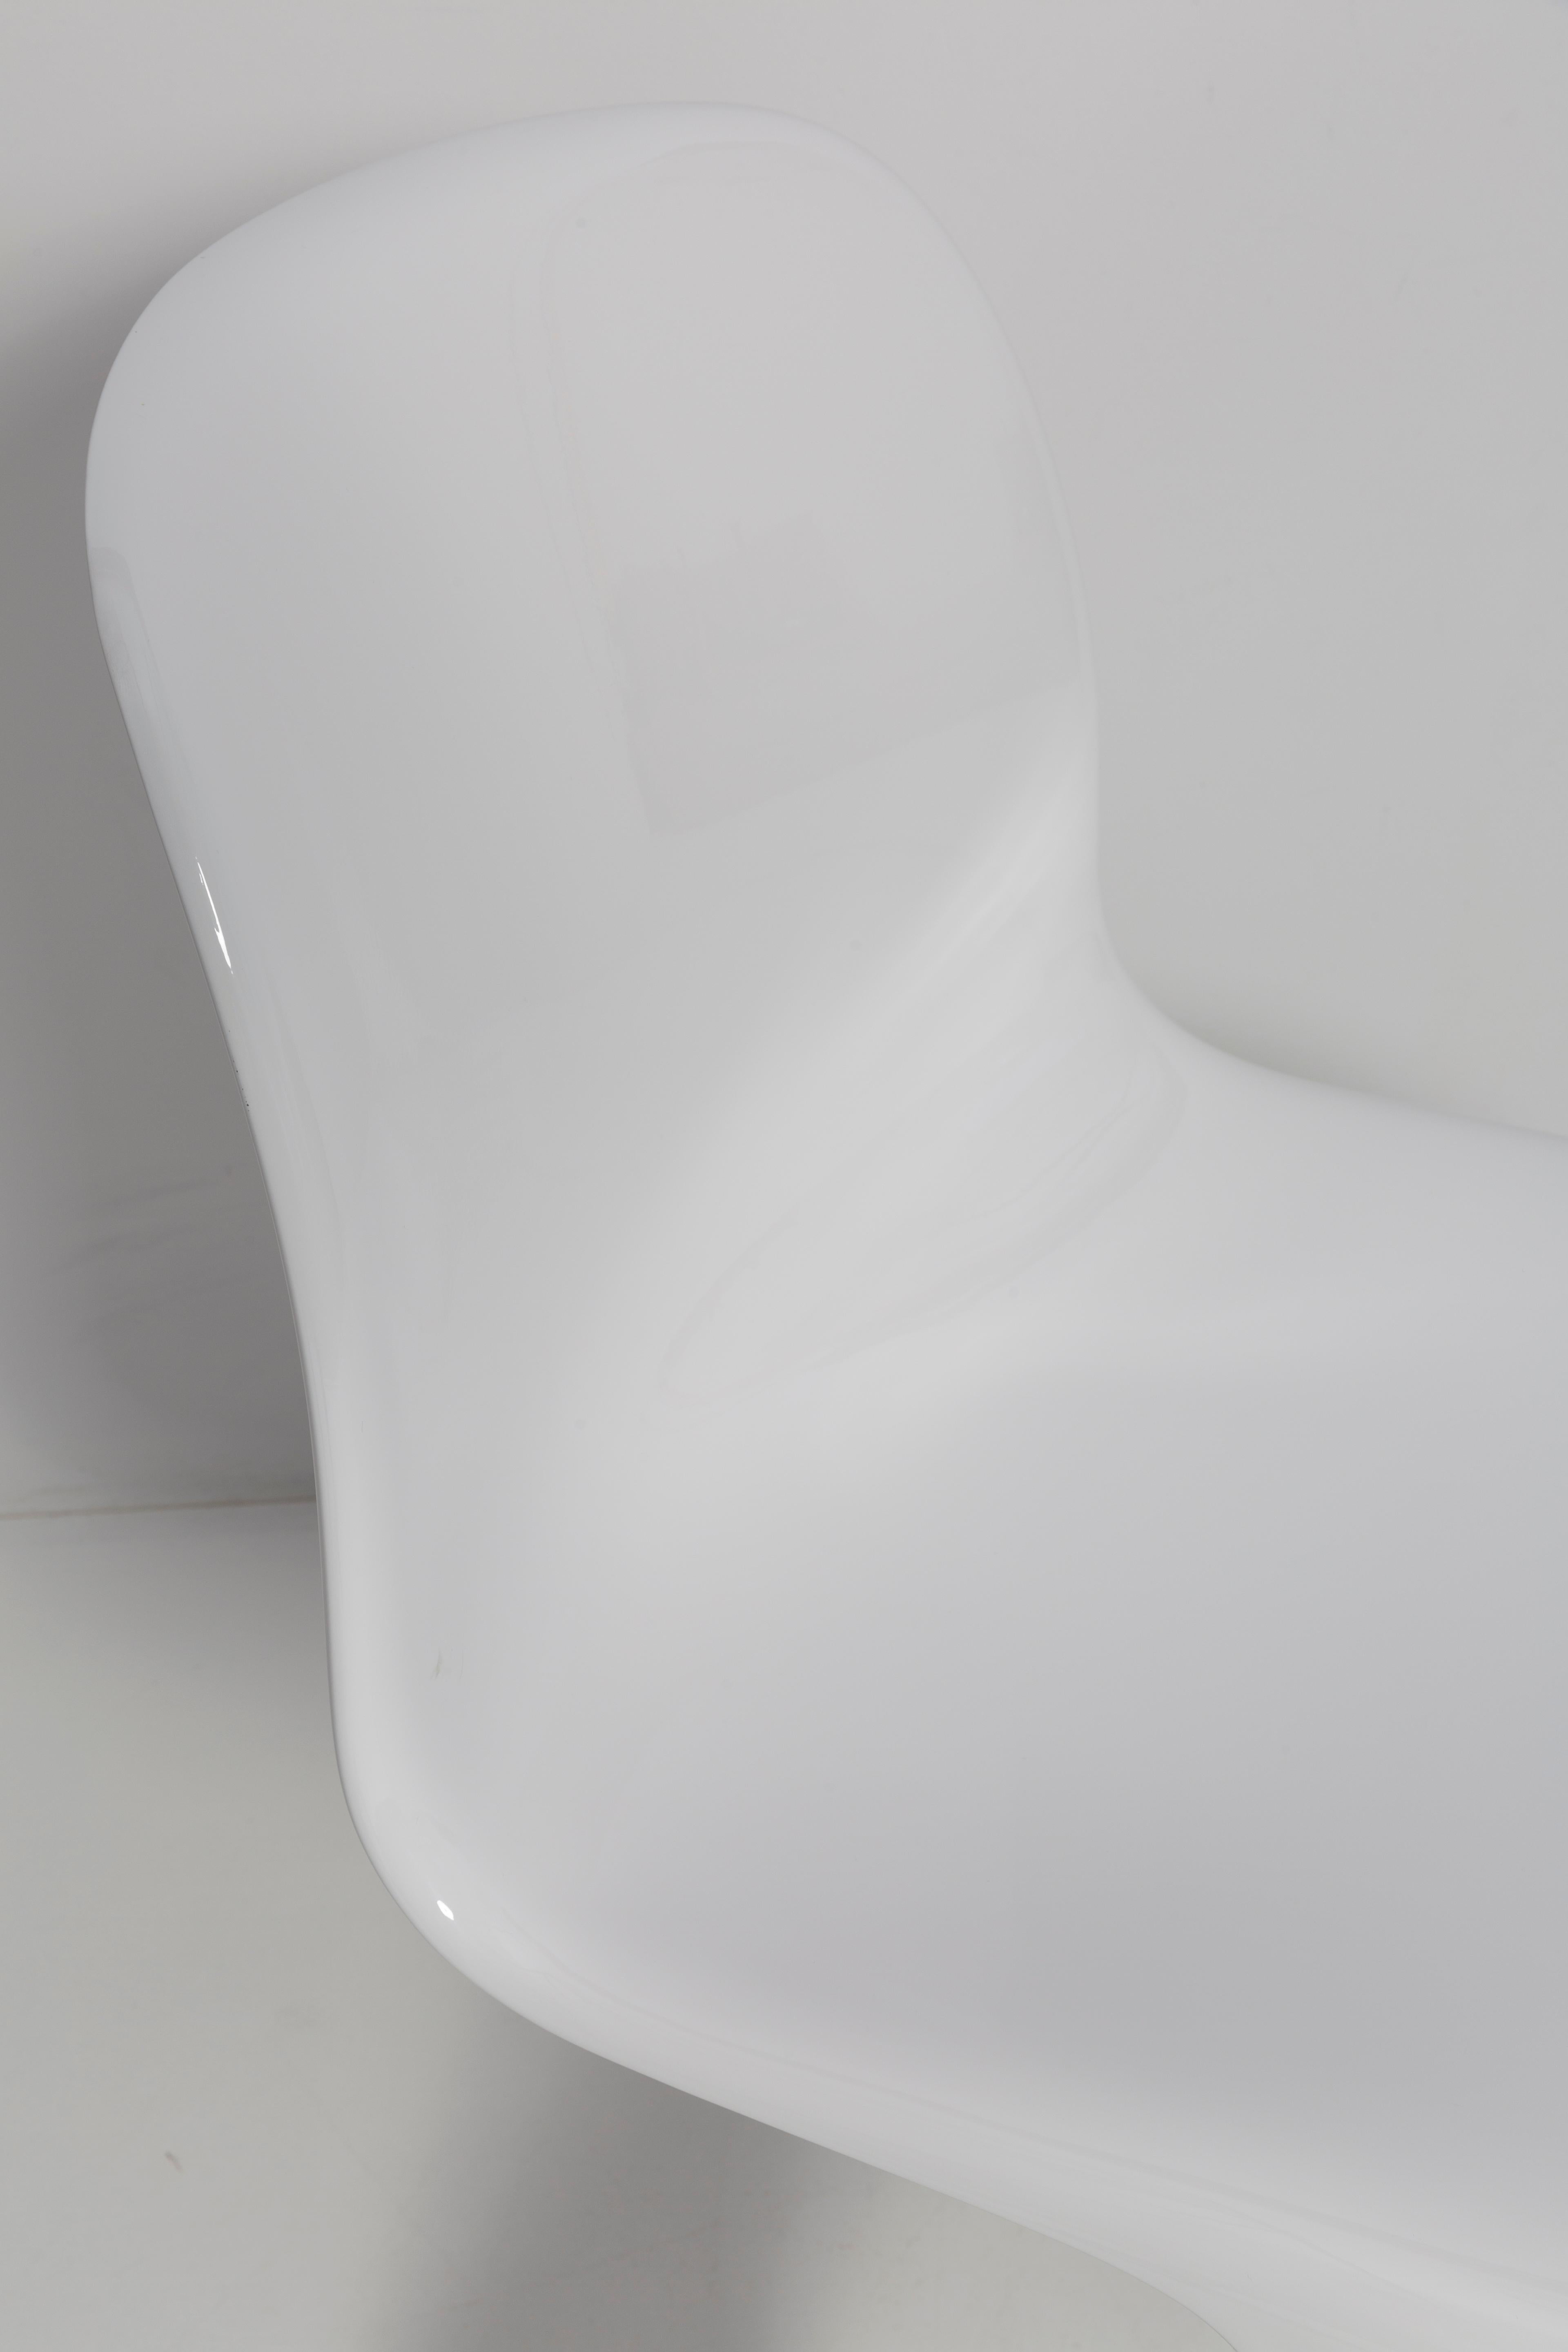 White Glossy Kangaroo Chair Designed by Ernst Moeckl, Germany, 1960s In Excellent Condition For Sale In 05-080 Hornowek, PL